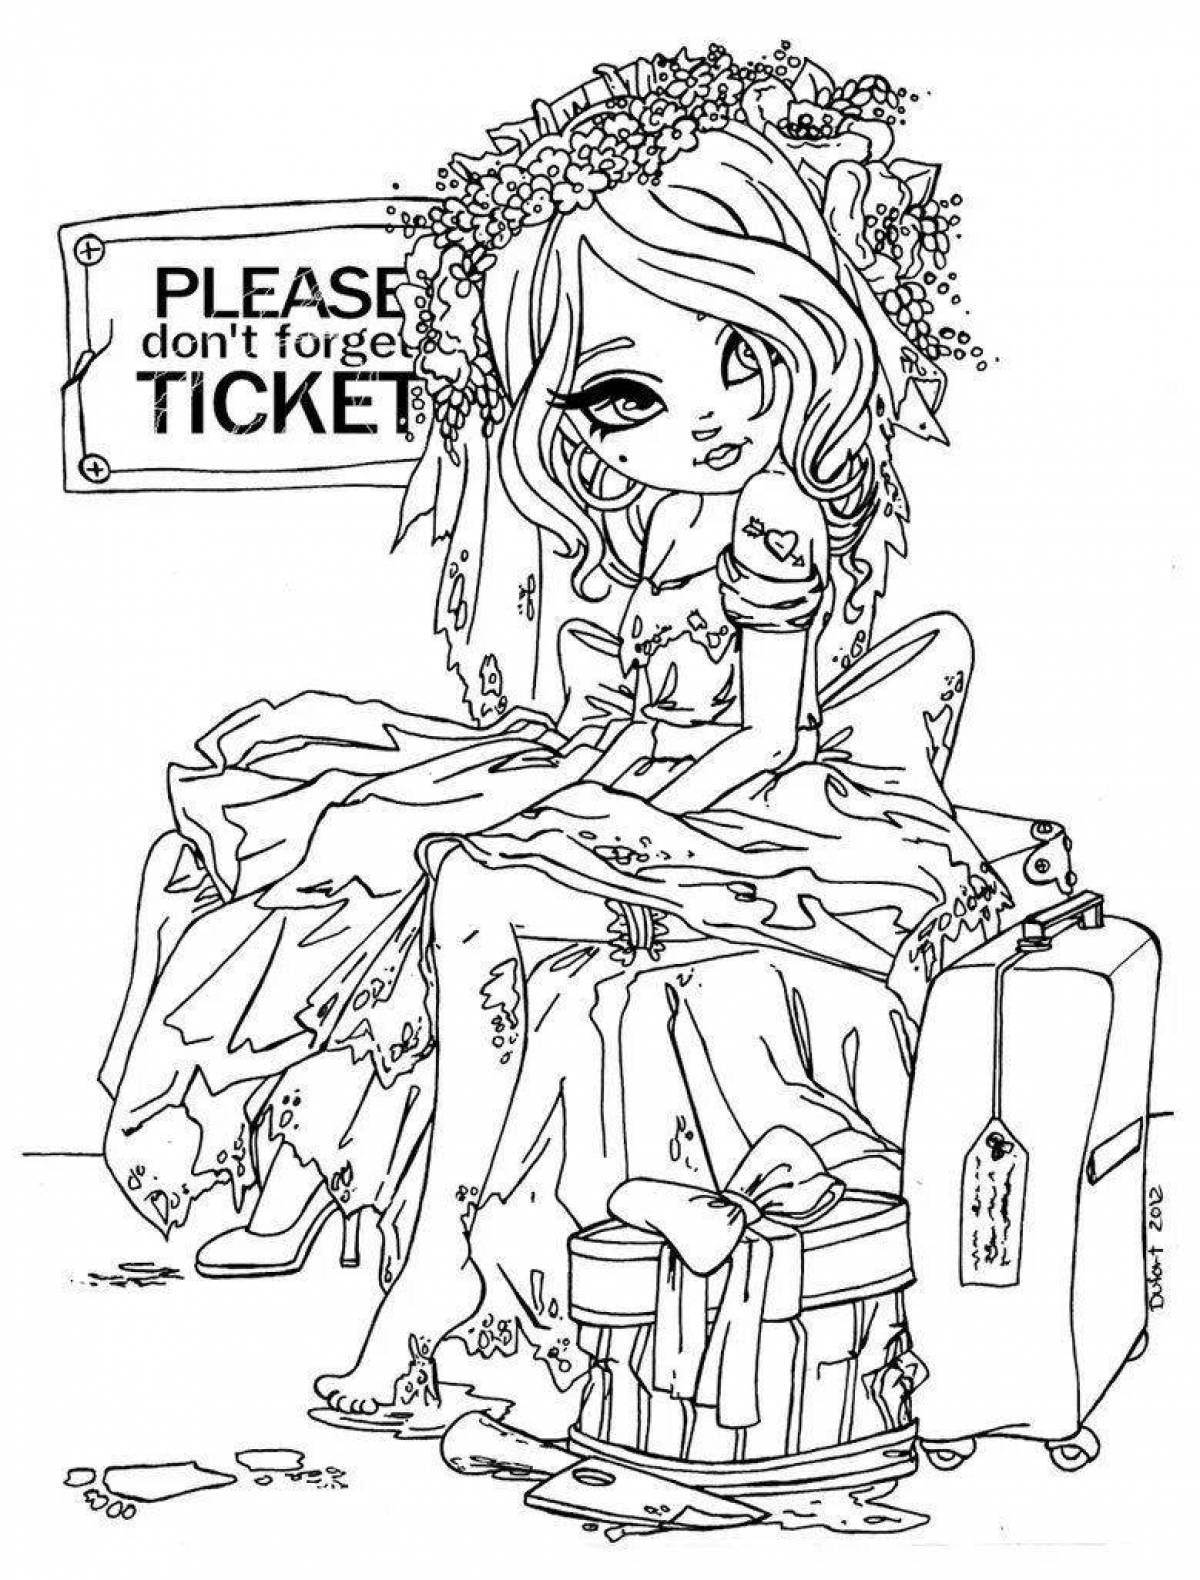 Playful cave club dolls coloring page